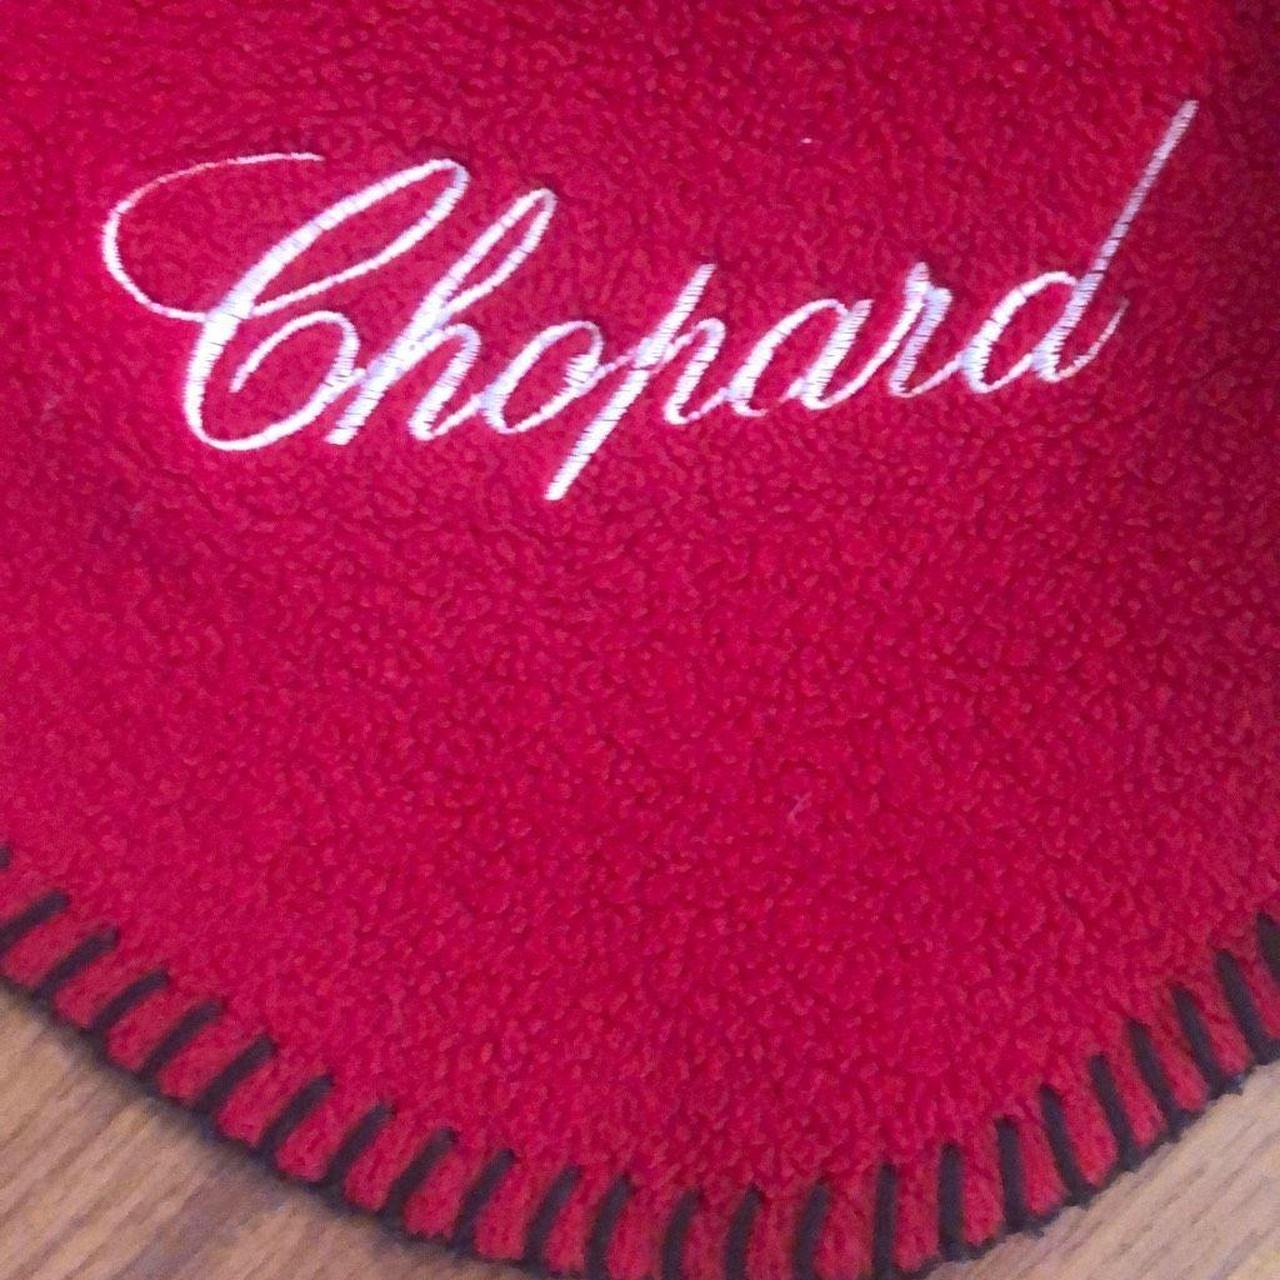 Chopard Red and Black Soft-furnishings-textiles (2)